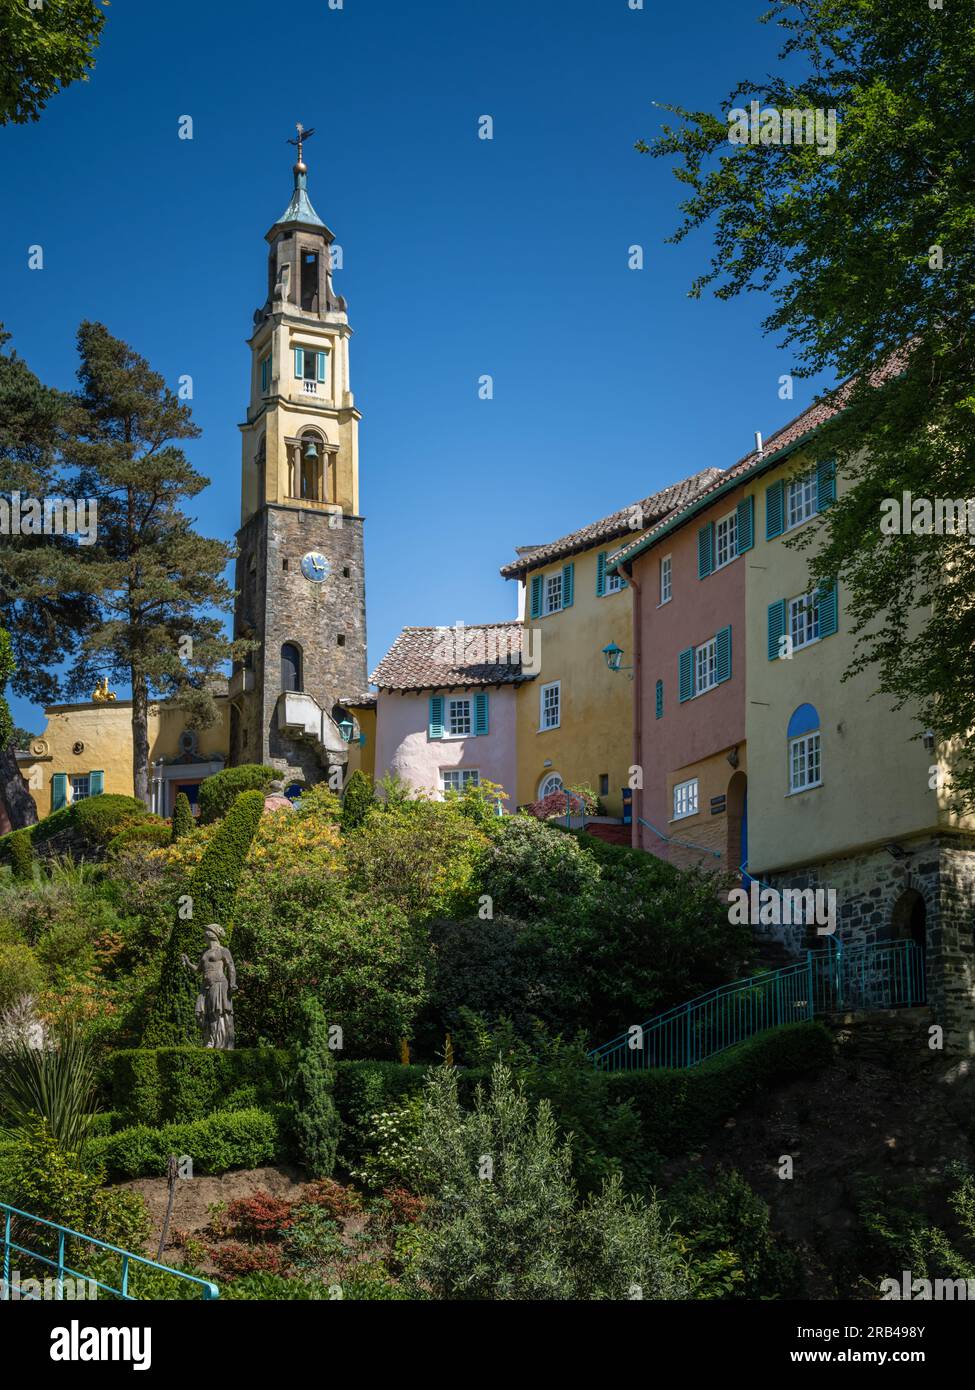 The Bell Tower, Portmeirion, North Wales, Großbritannien Stockfoto